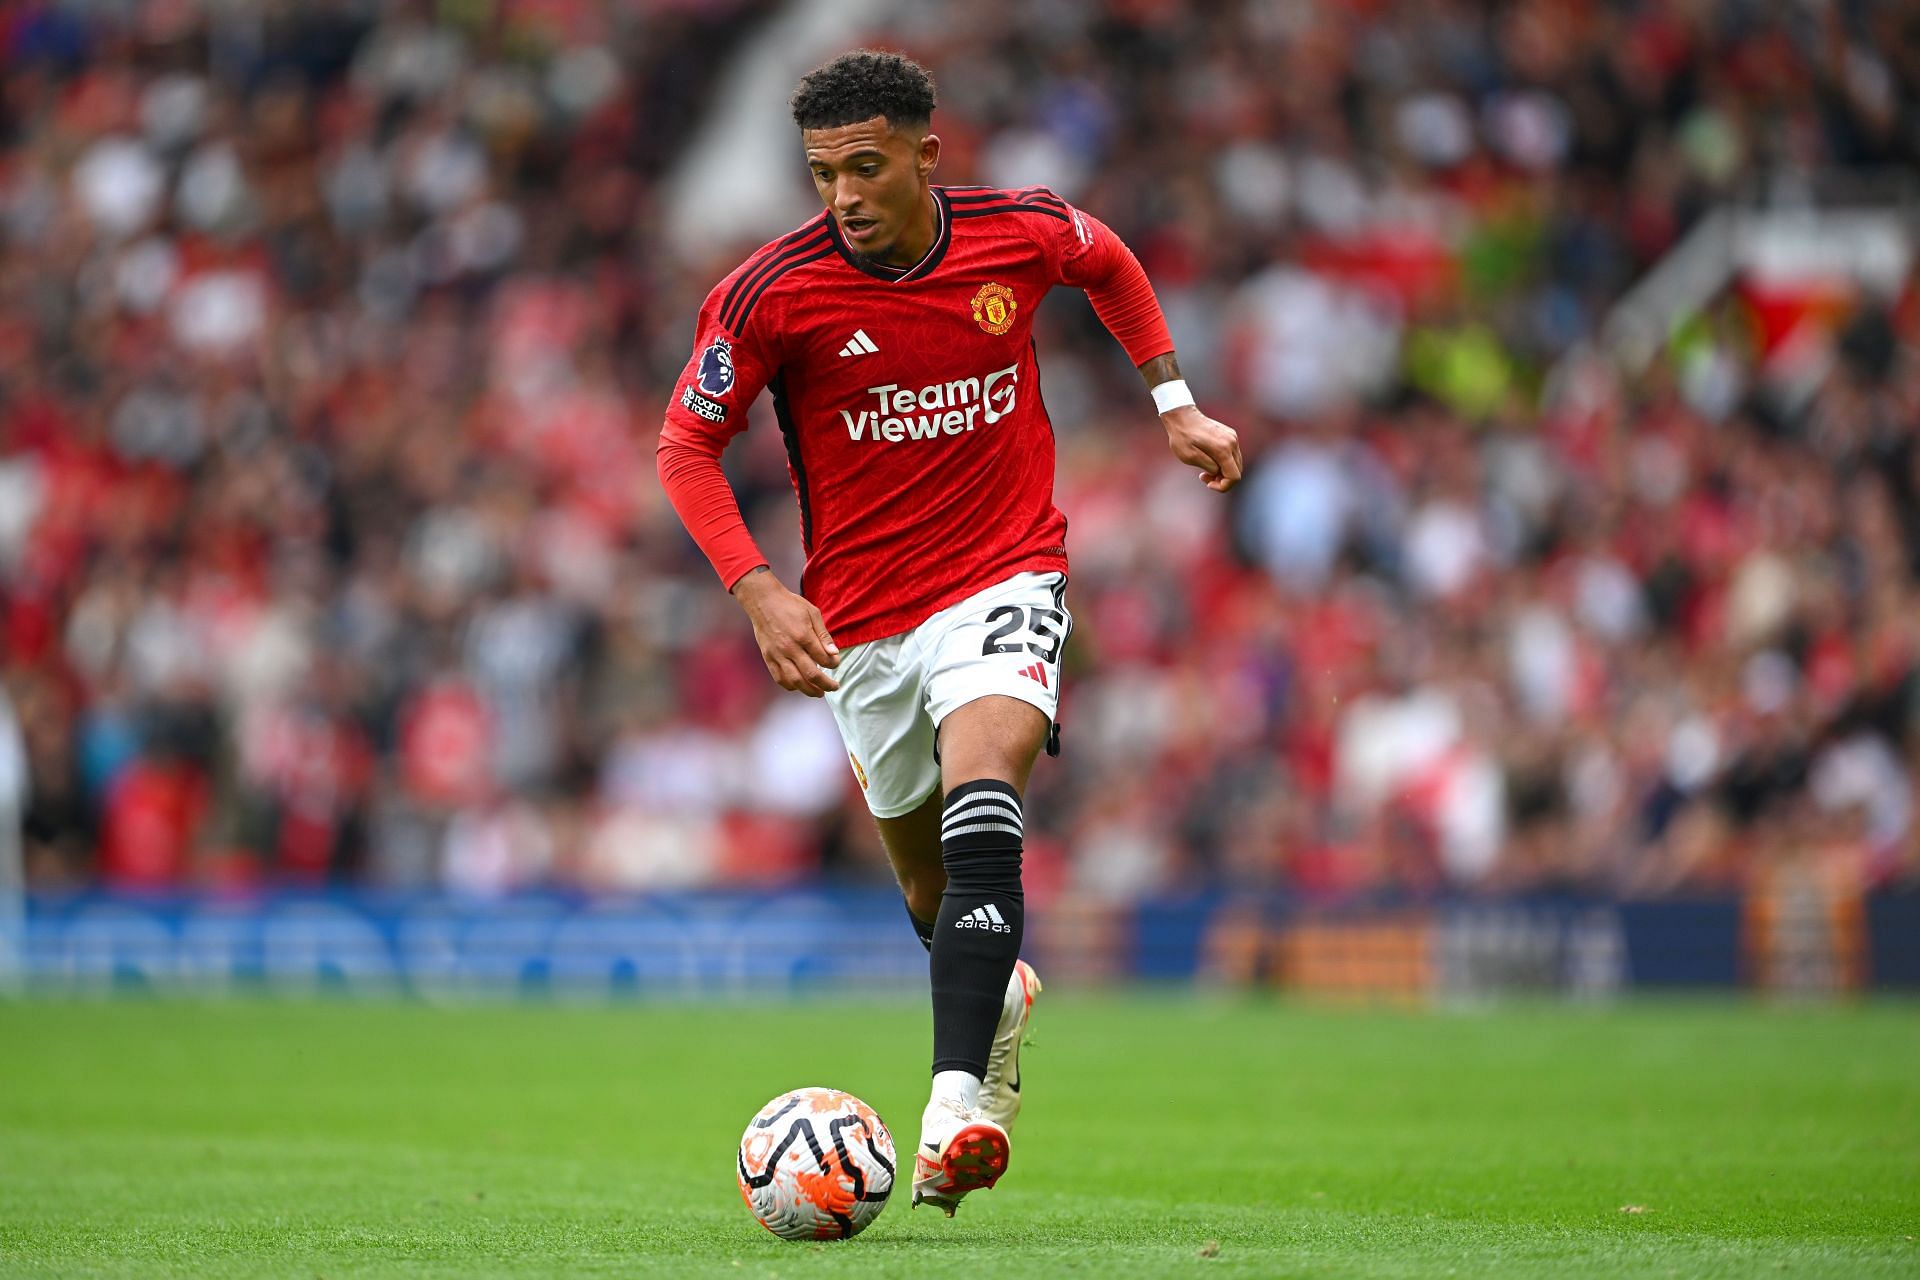 Jadon Sancho&rsquo;s future at Old Trafford remains up in the air